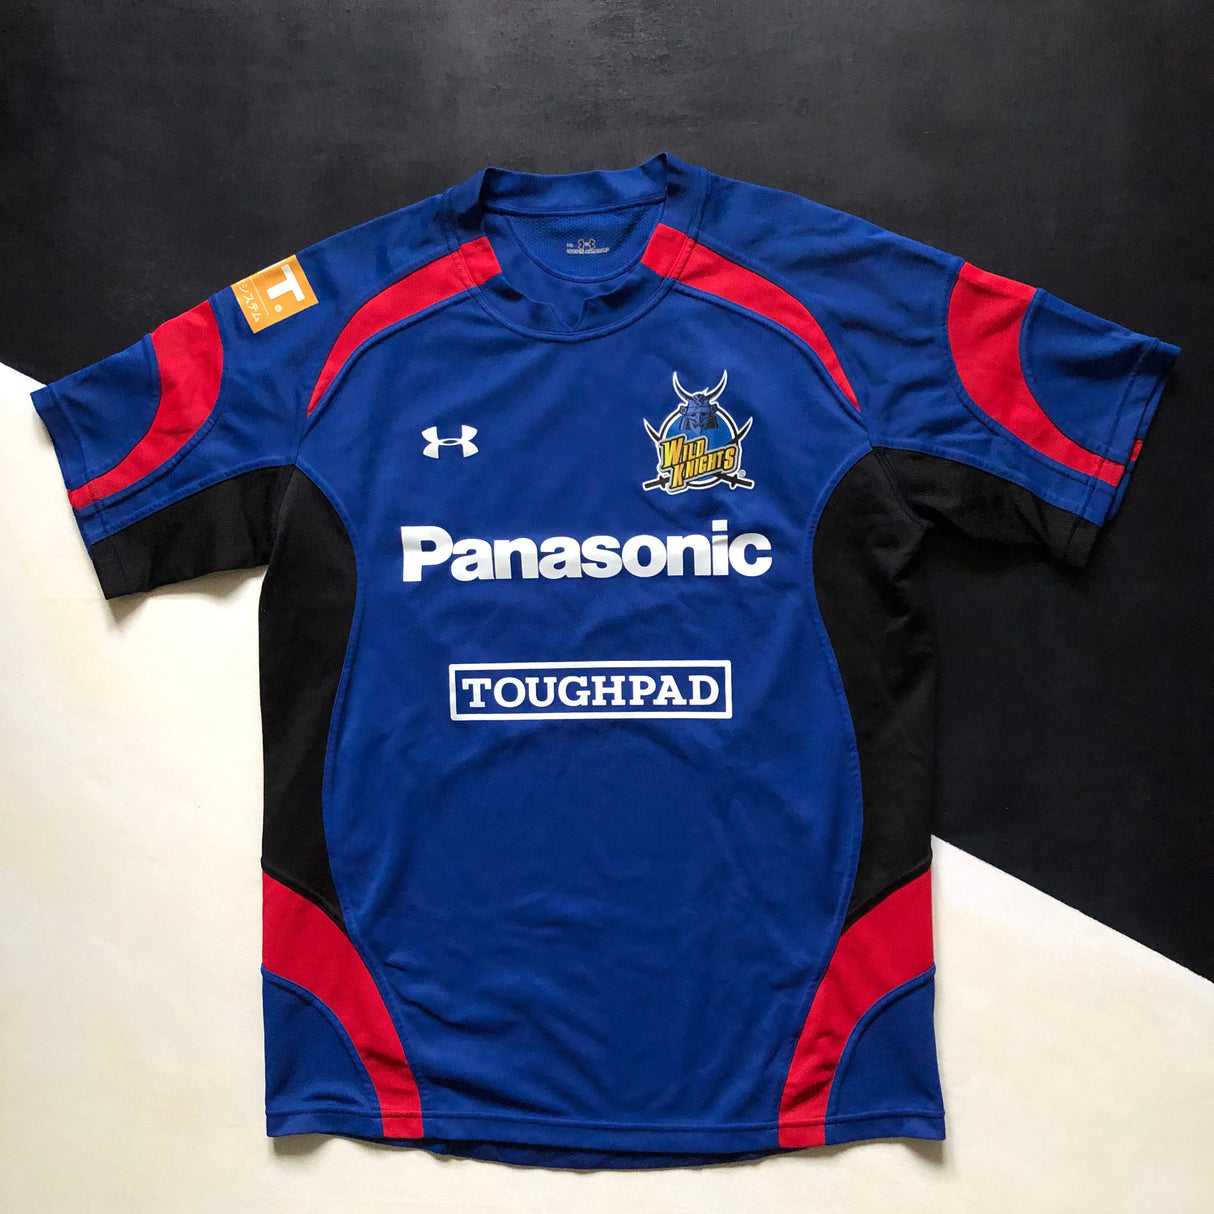 Wild Knights Rugby Team Training Jersey 2016 (Japan Top League) Large Underdog Rugby - The Tier 2 Rugby Shop 